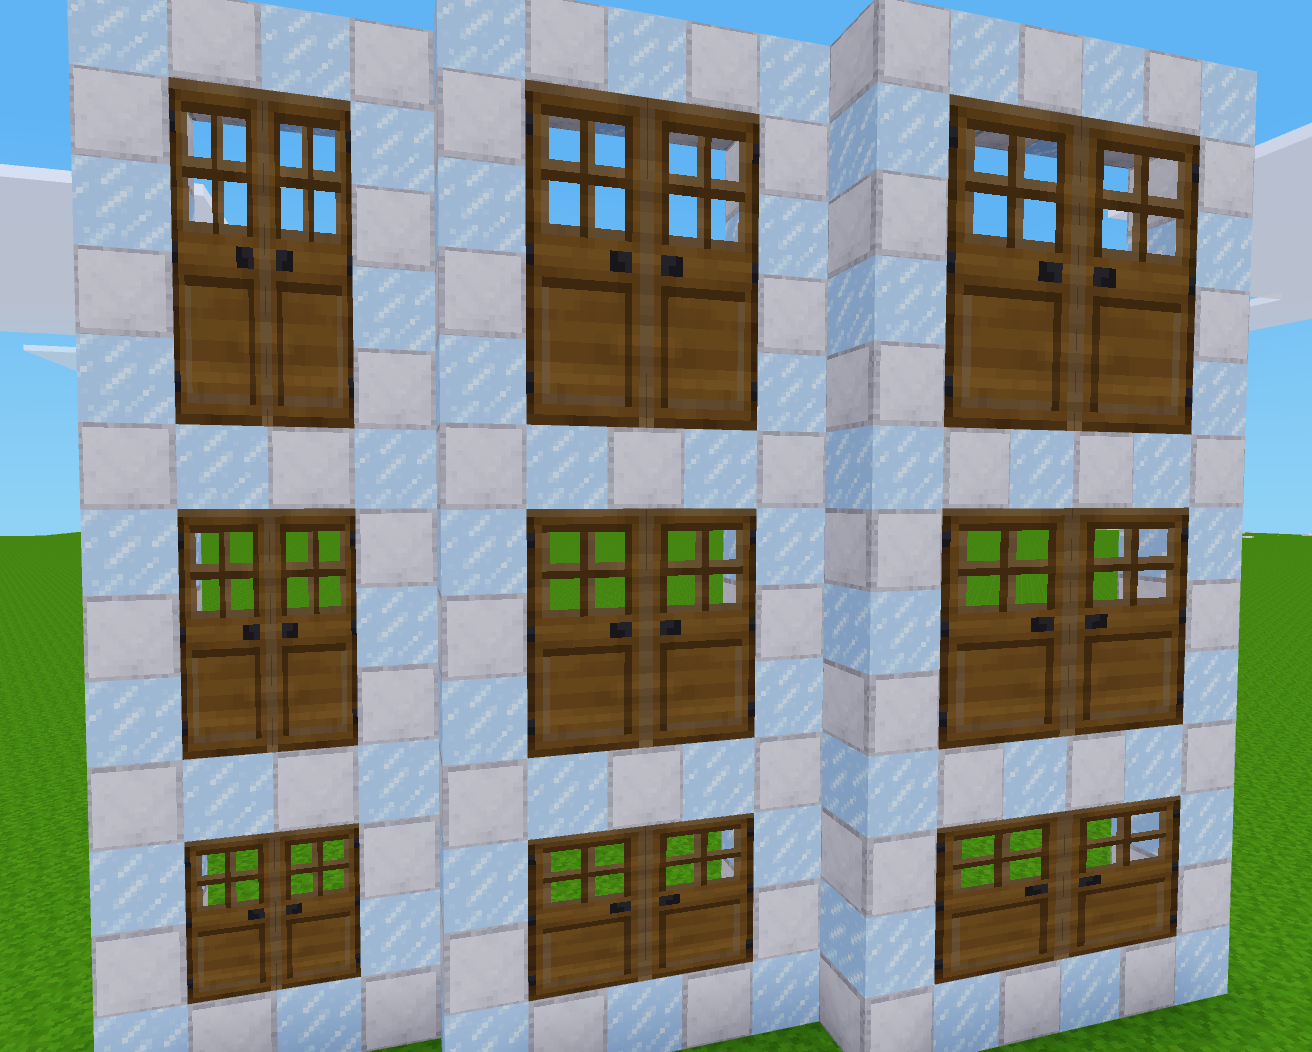 All new door variations laid out in a three by three grid, with alternating blocks aroud the border to make it clear how big they are